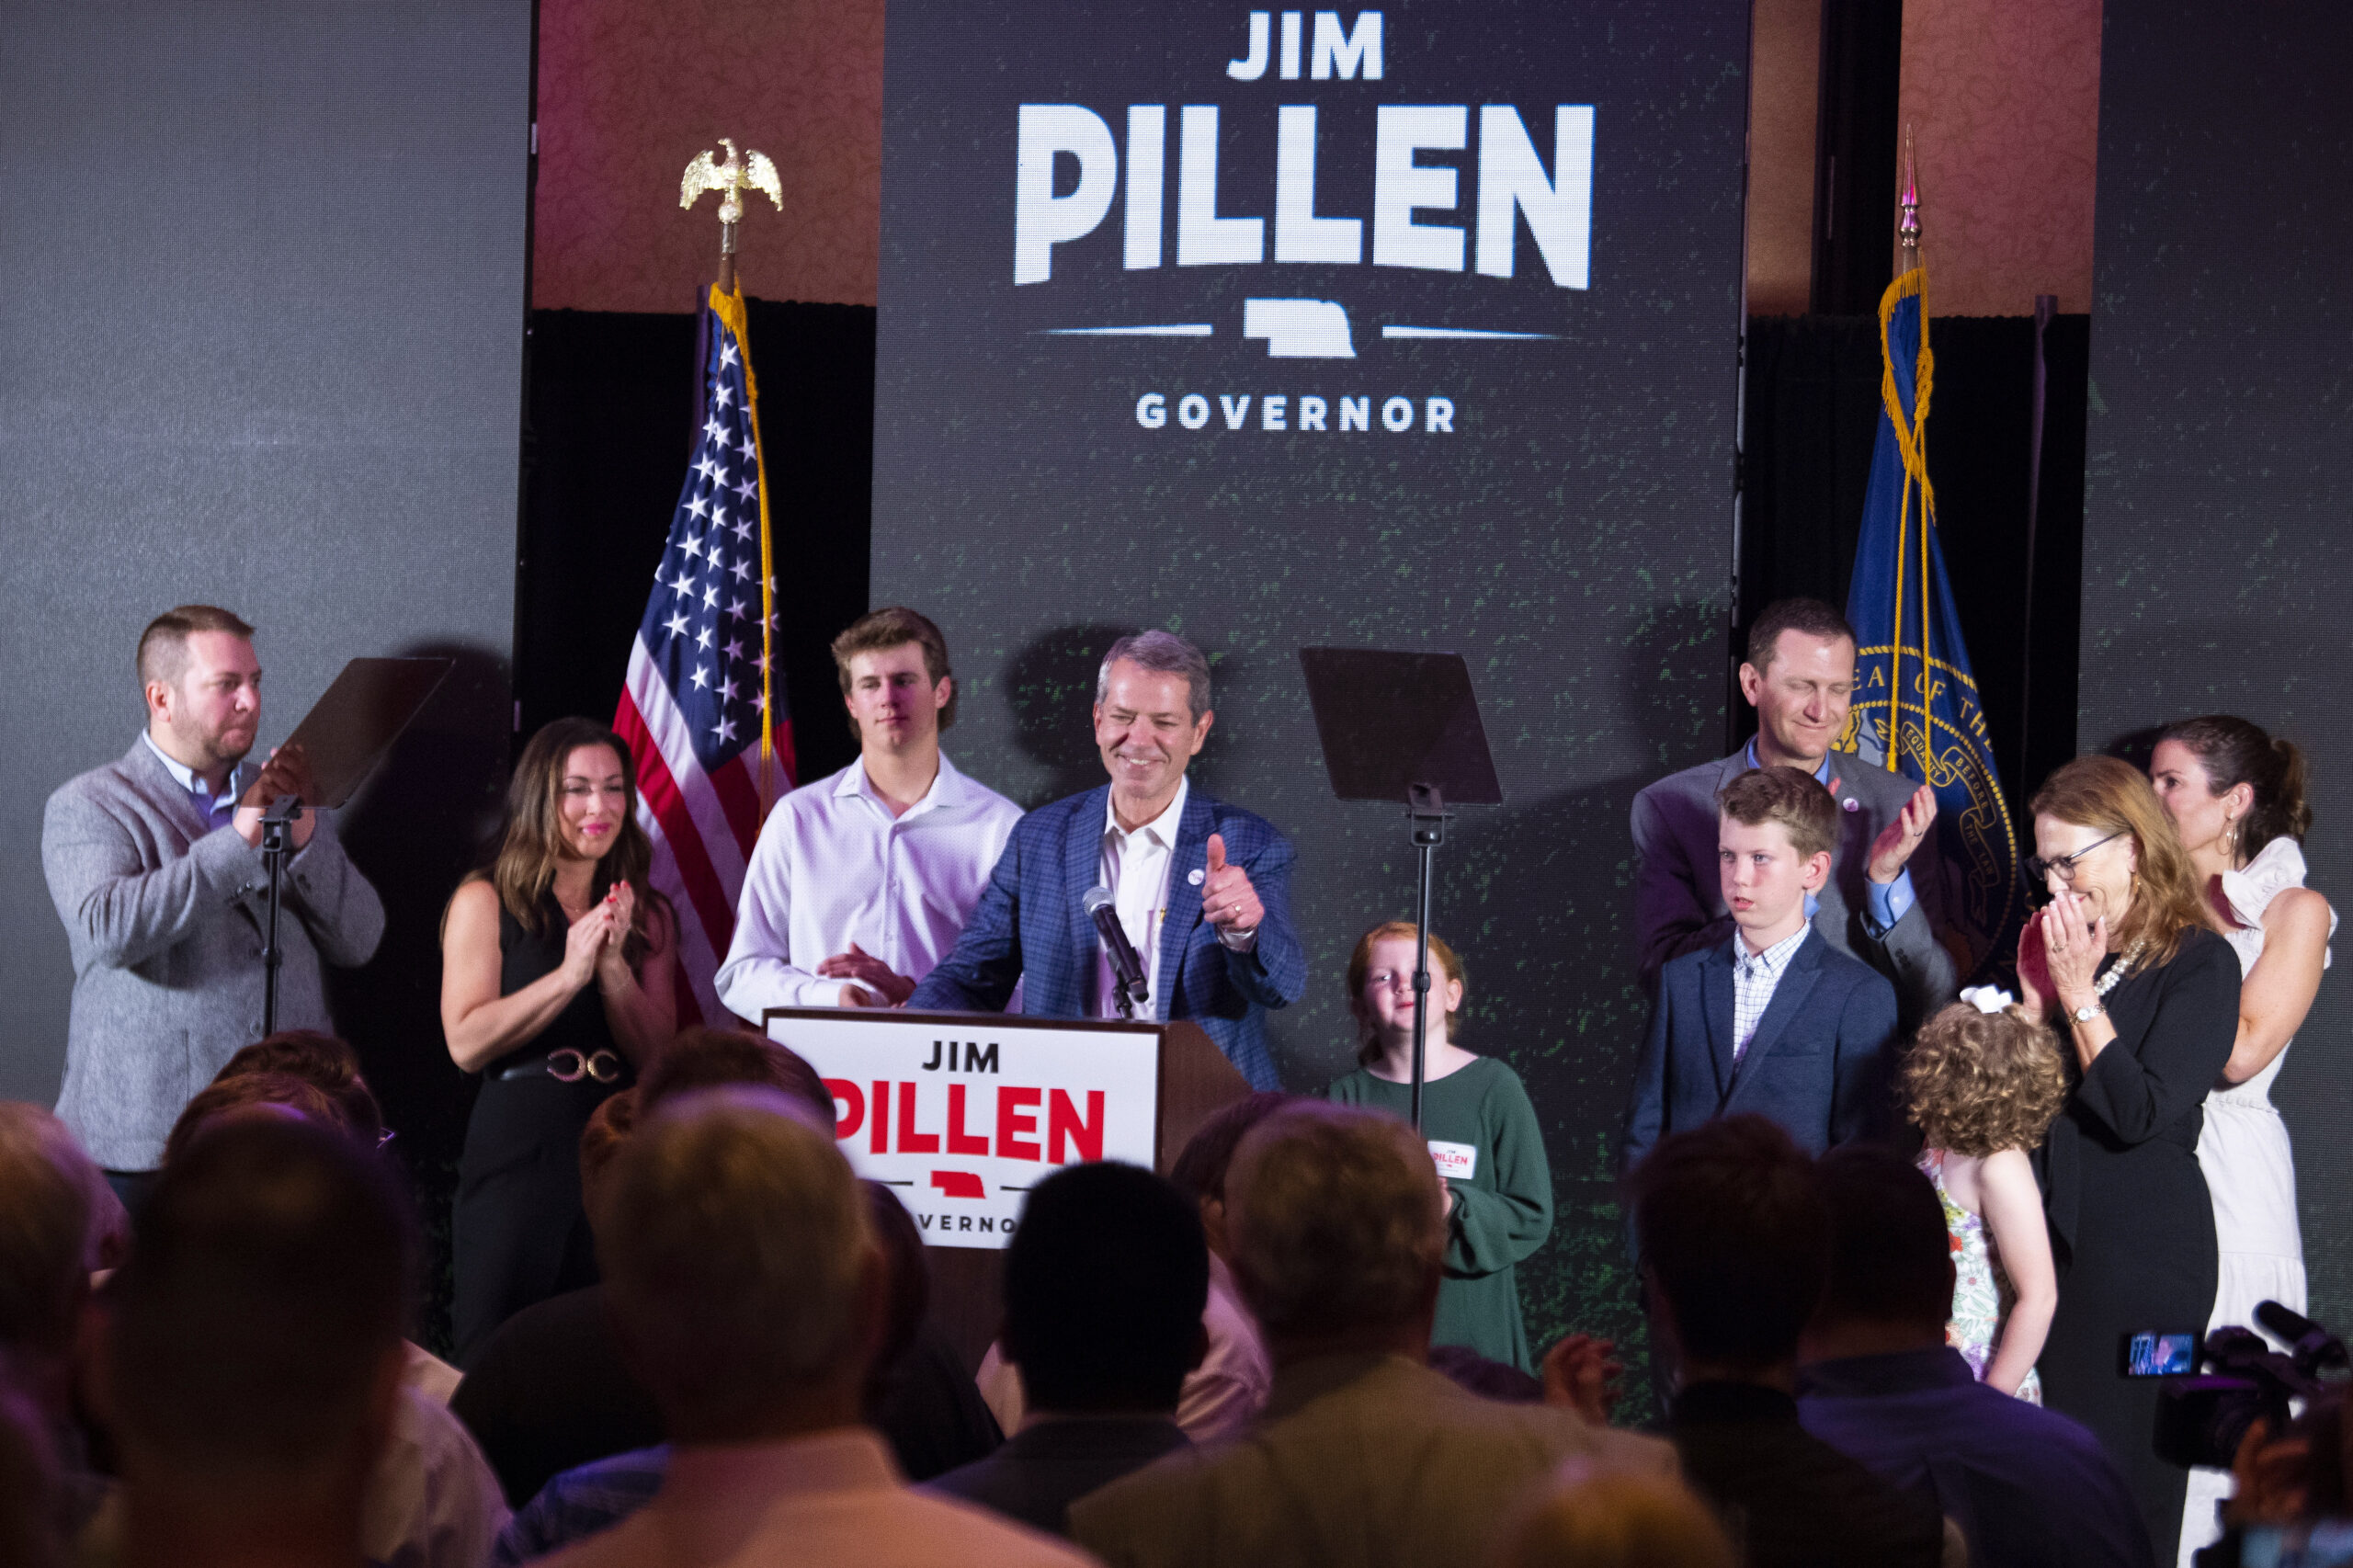 University of Nebraska Regent Jim Pillen, center, gives a thumbs up to a wave of applause as he is named the winner of the Nebraska Republican gubernatorial primary during an election night party at the Embassy Suites on Tuesday, May 10, 2022, in Lincoln, Neb. (Kenneth Ferriera/Lincoln Journal Star via AP)